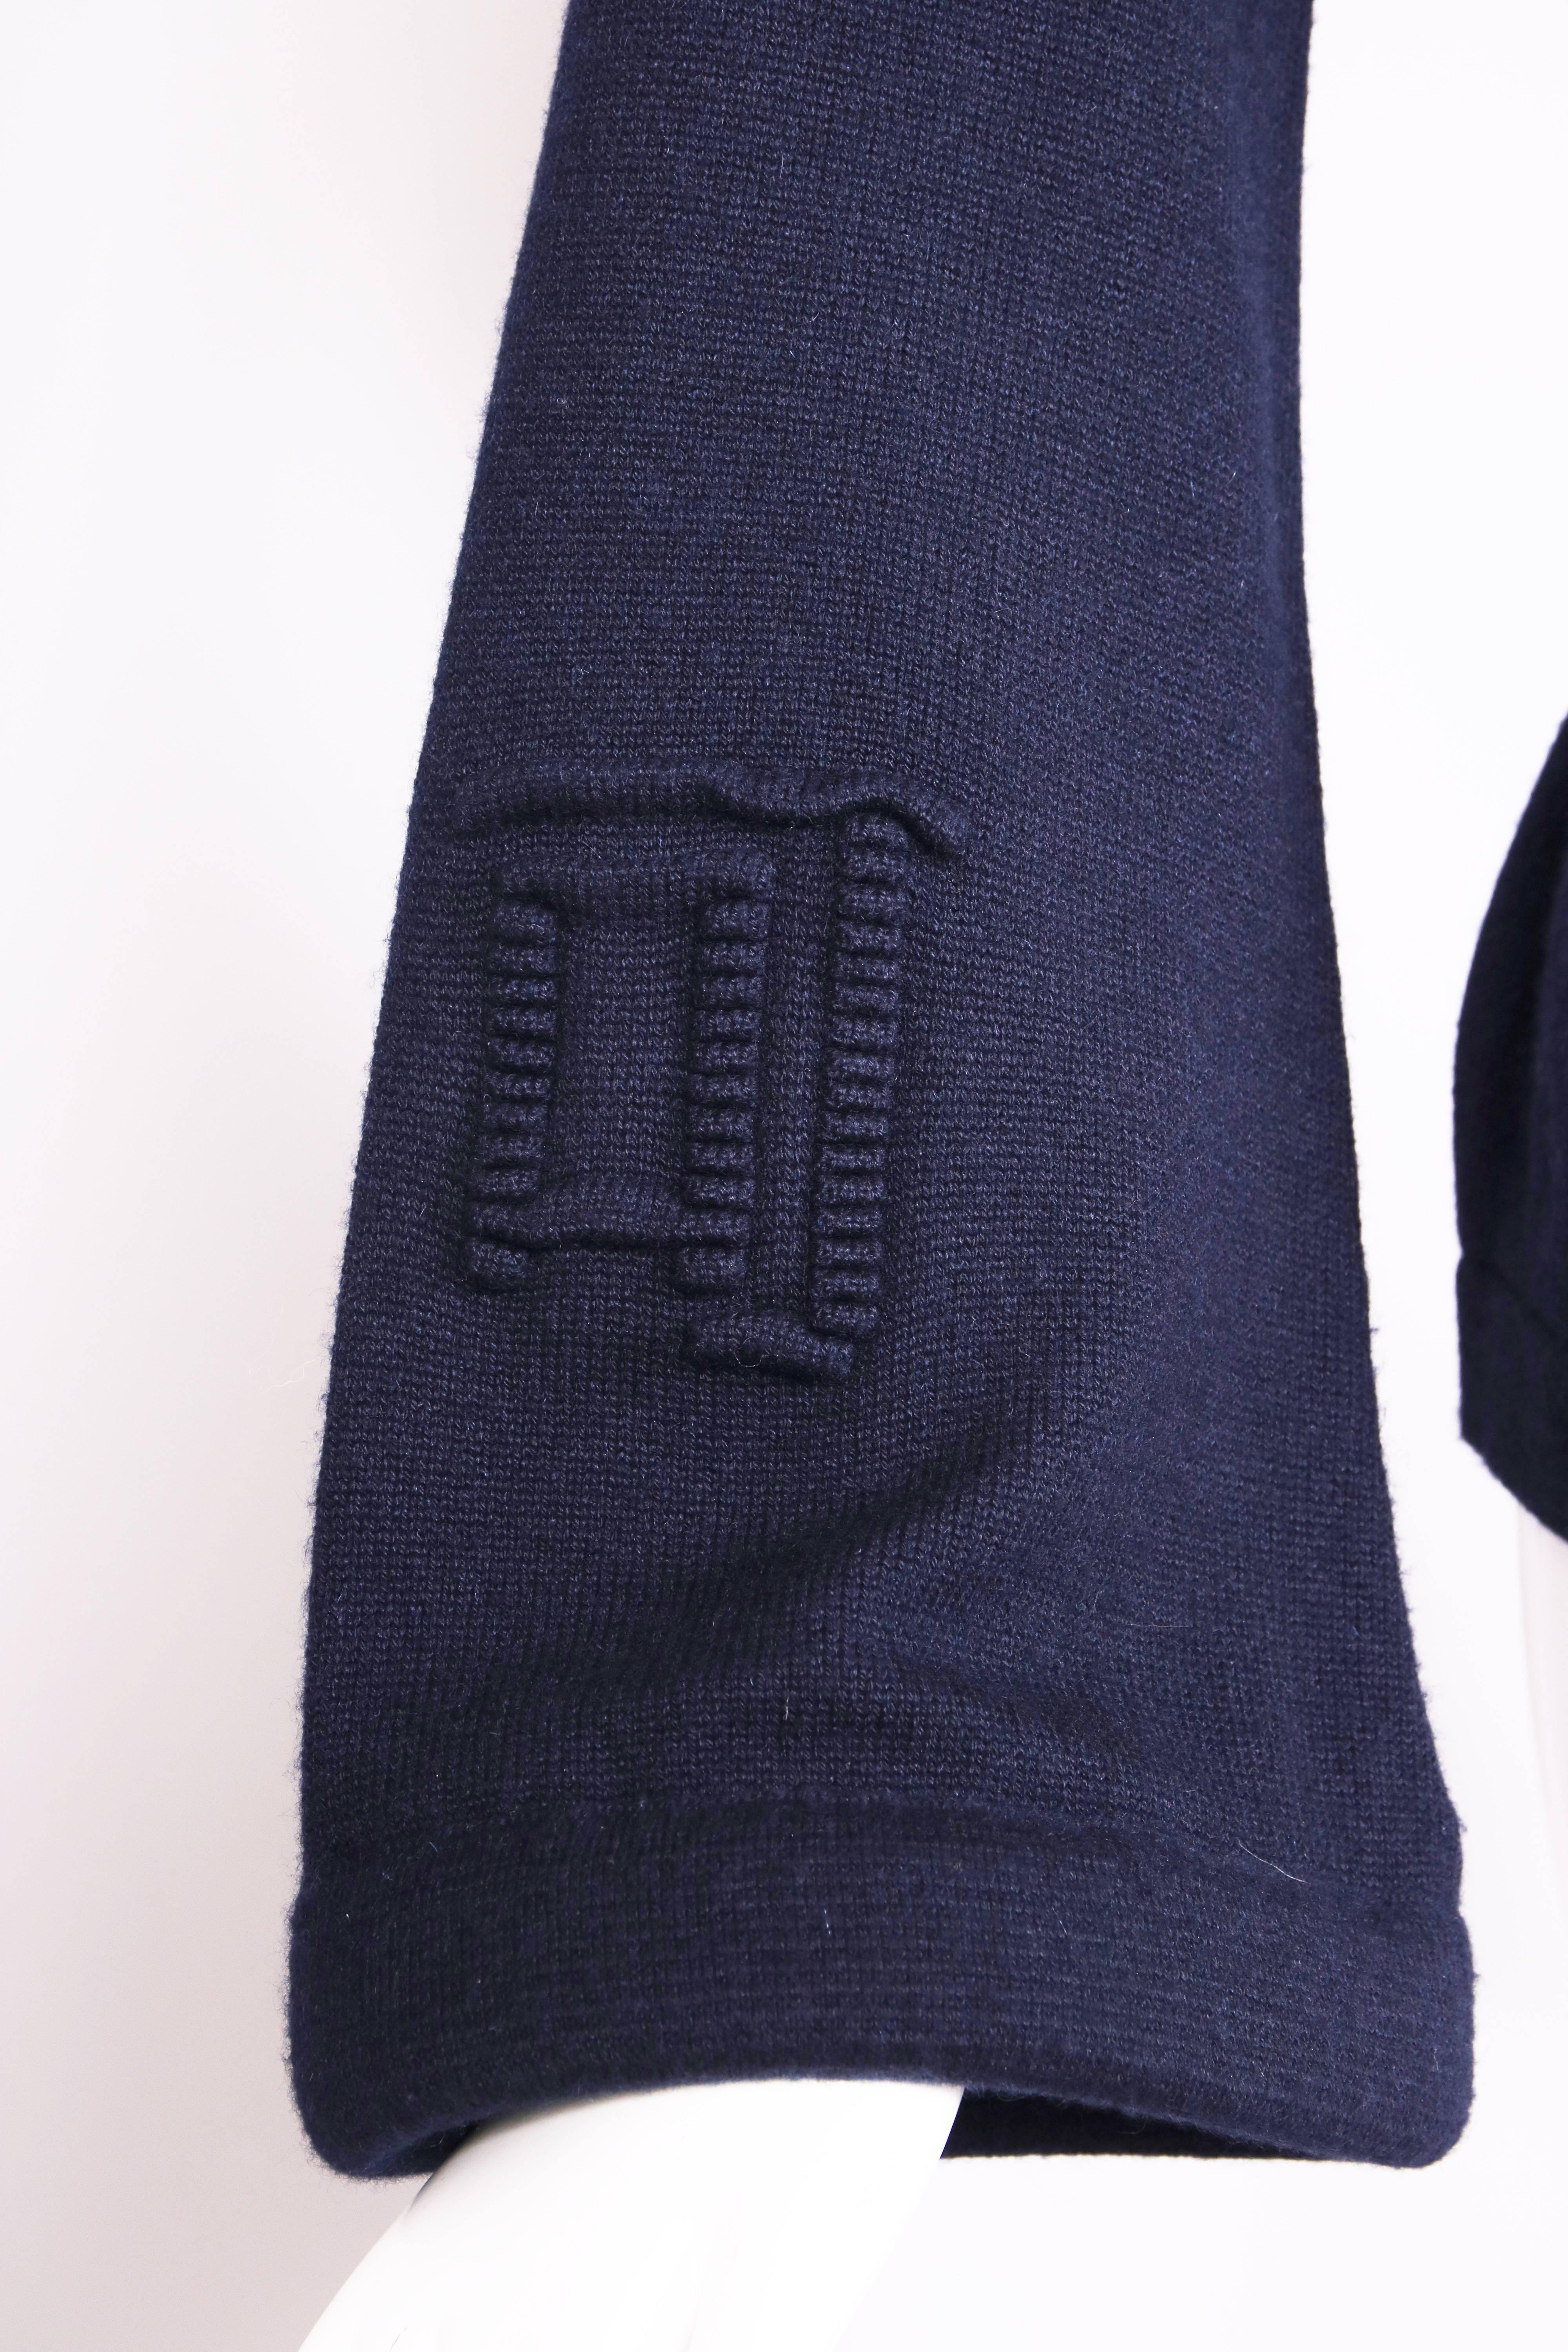 Black Chanel Navy Cashmere Cardigan With Bell Sleeves Waist Tie and Metal Buttons 2010